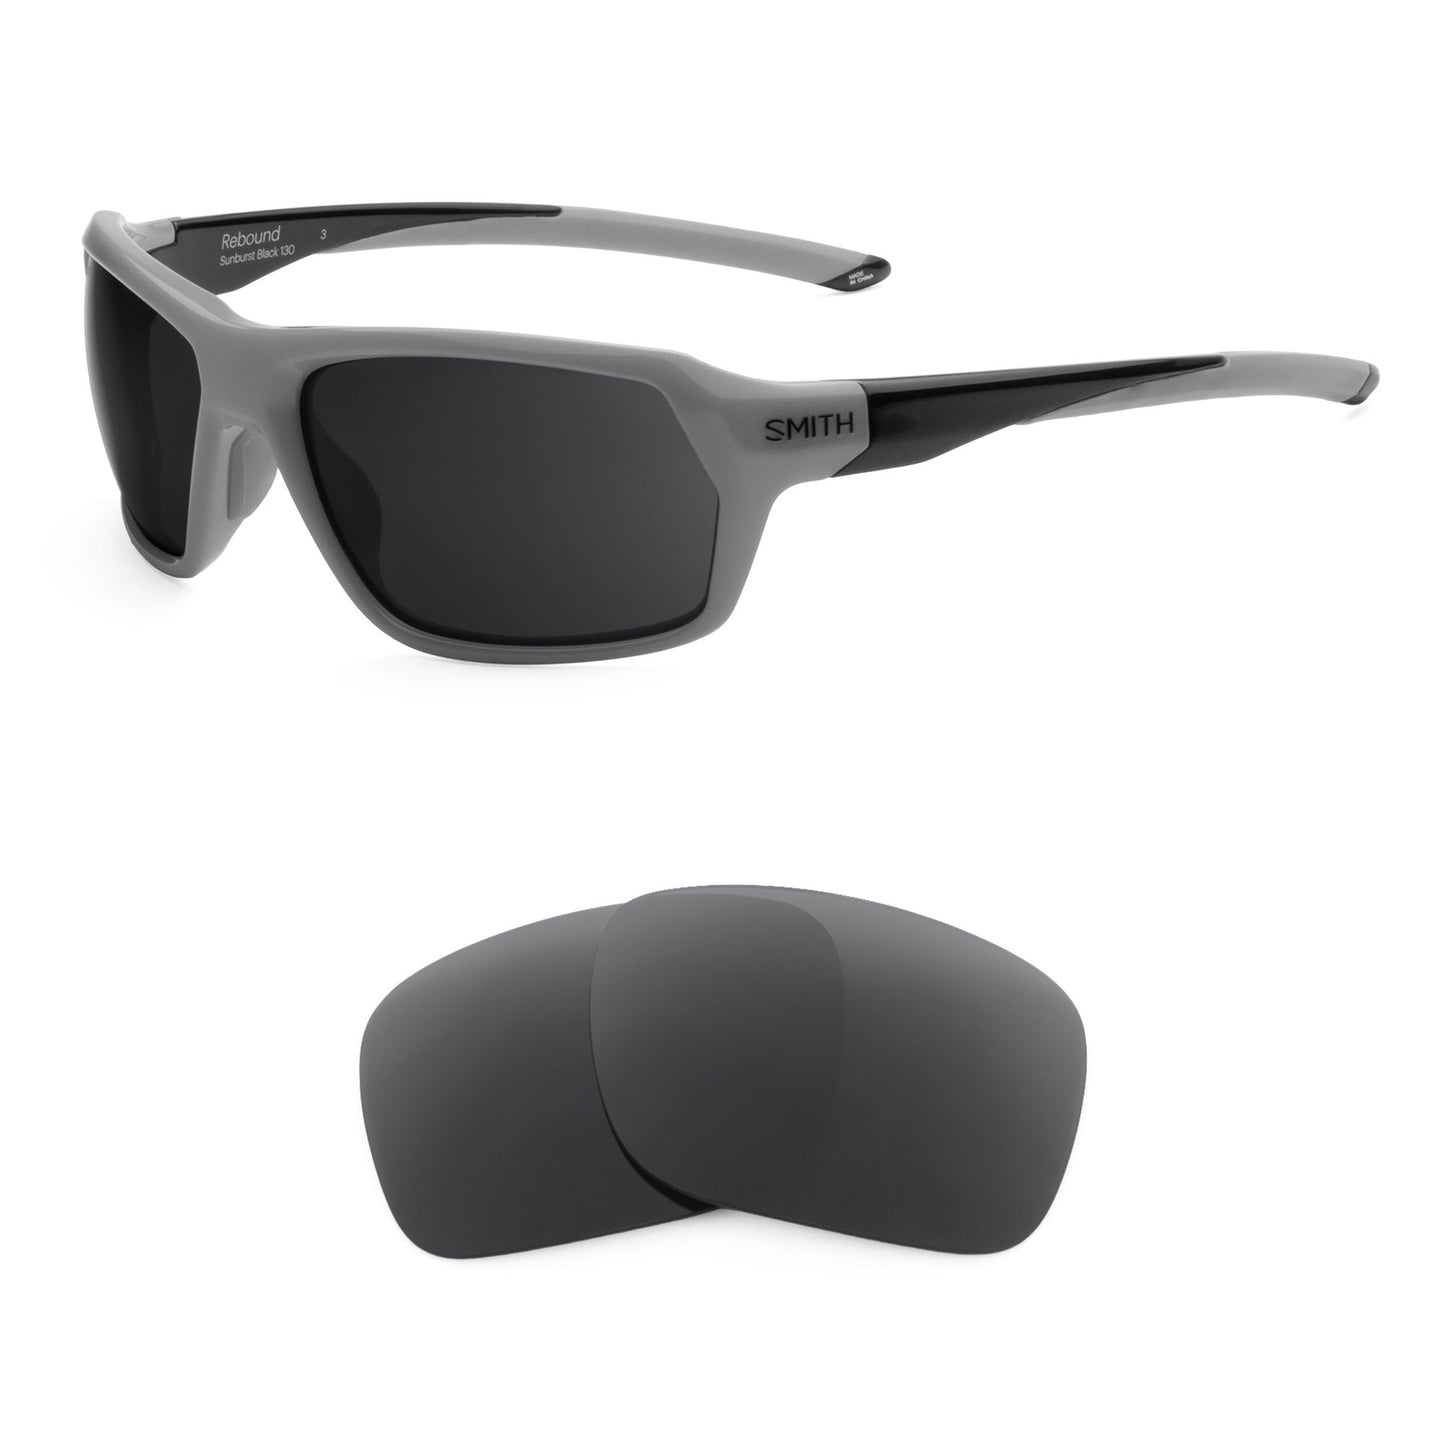 Smith Rebound sunglasses with replacement lenses